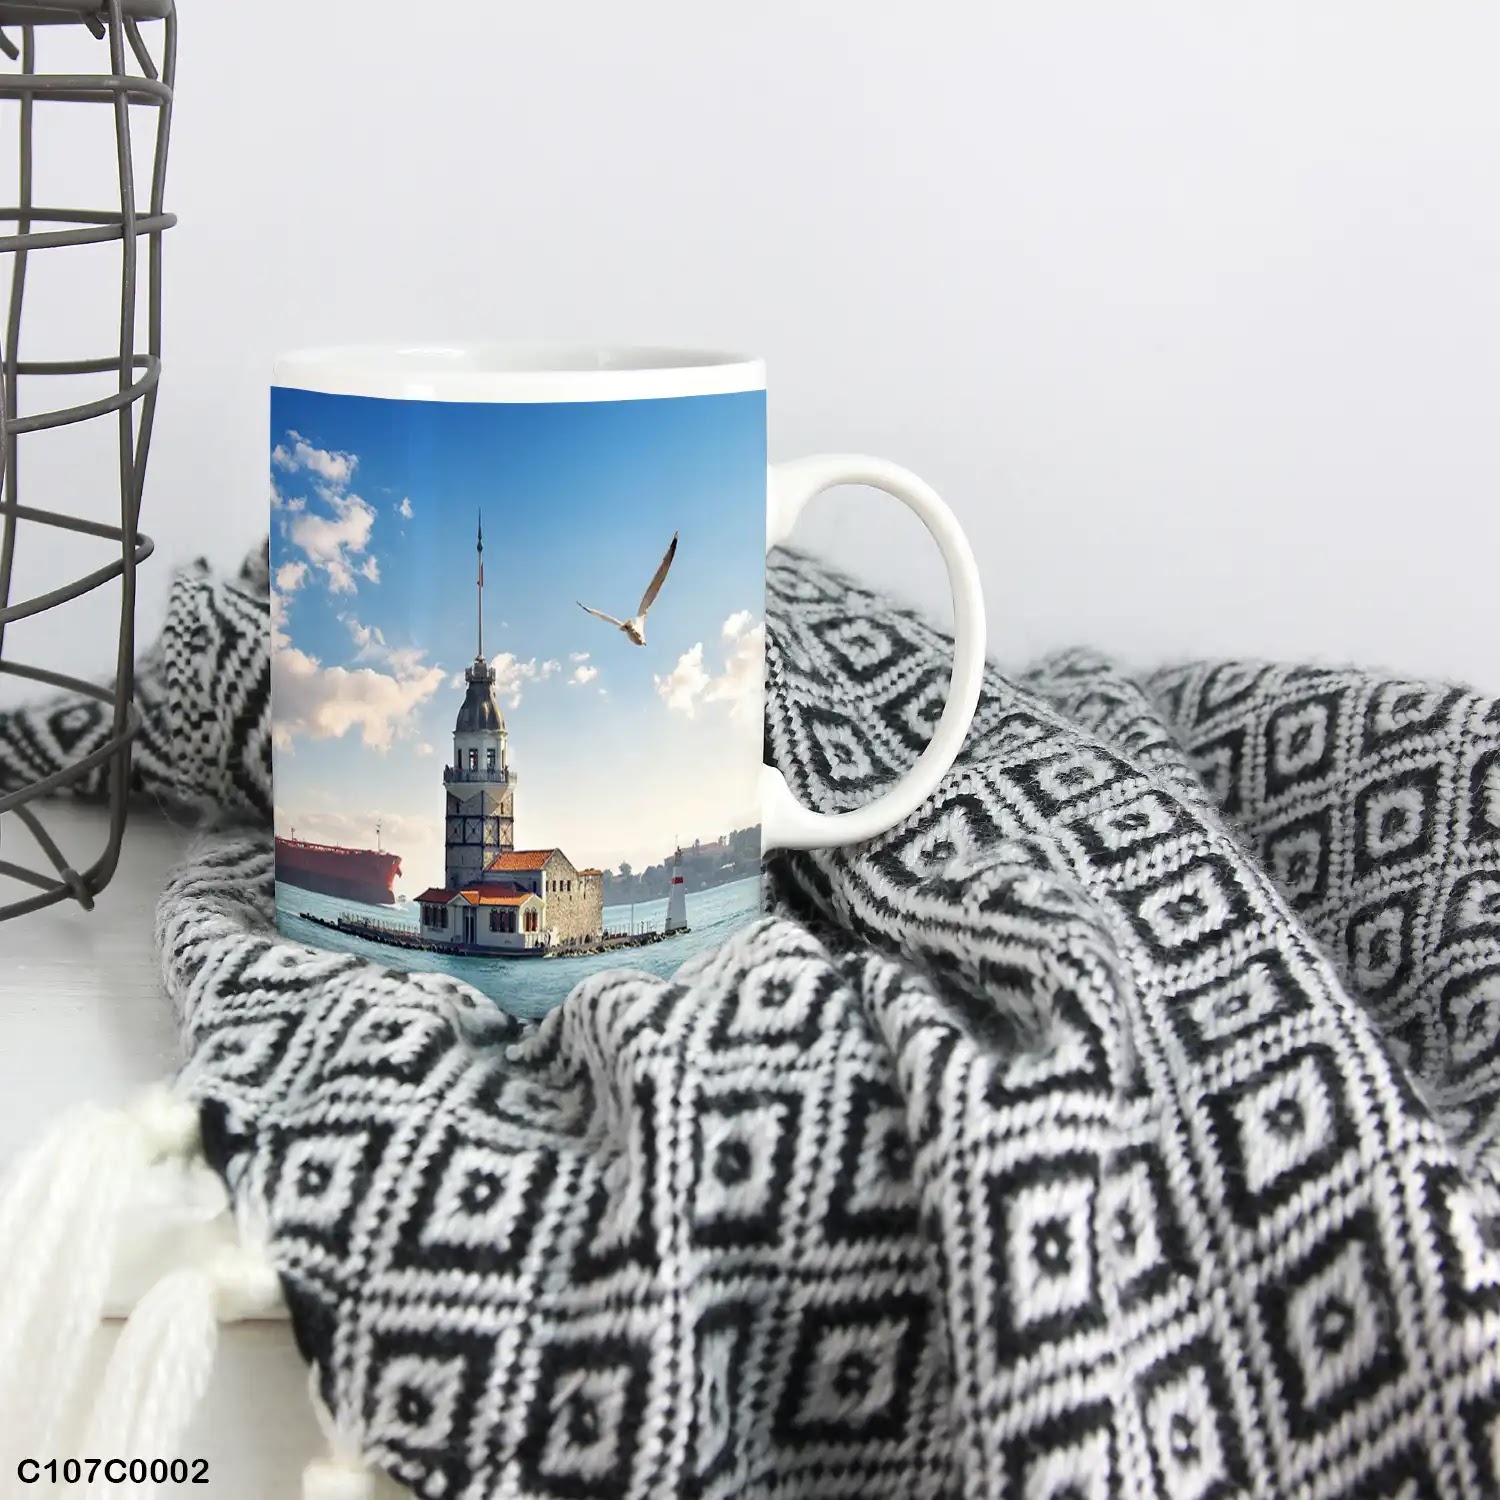 A mug (cup) printed with an image of Maiden tower and sea